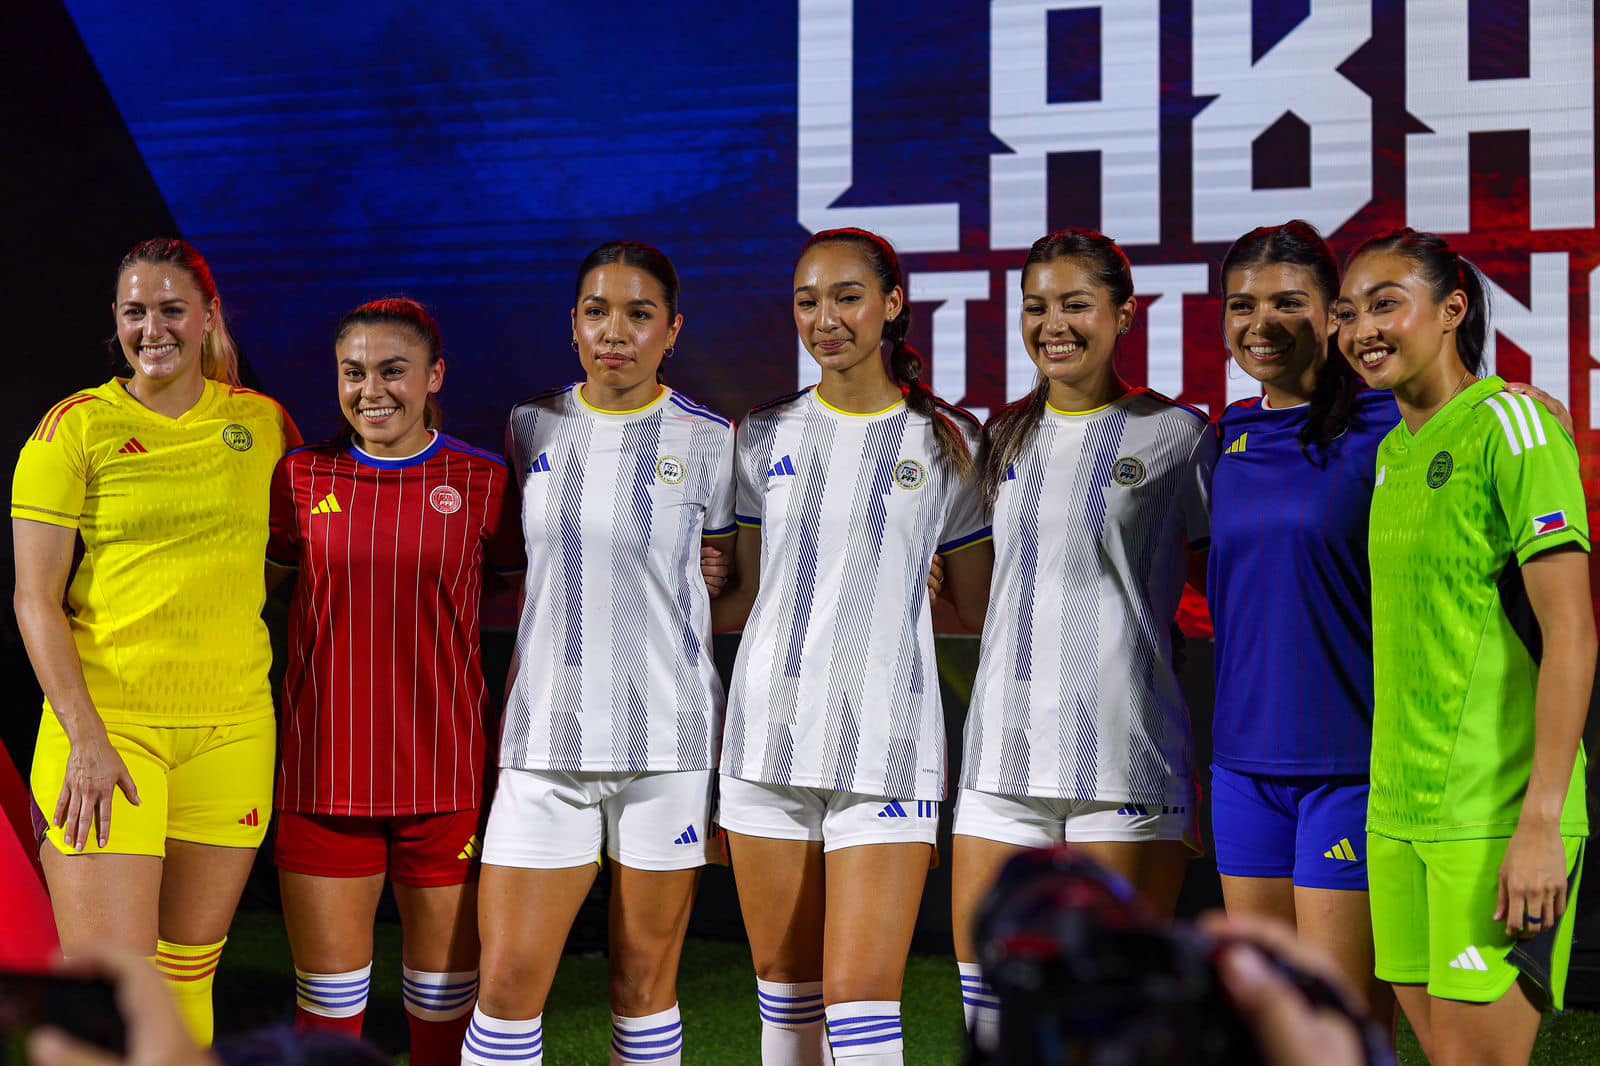 How To Watch the Filipinas in The 2023 FIFA Women's World Cup 